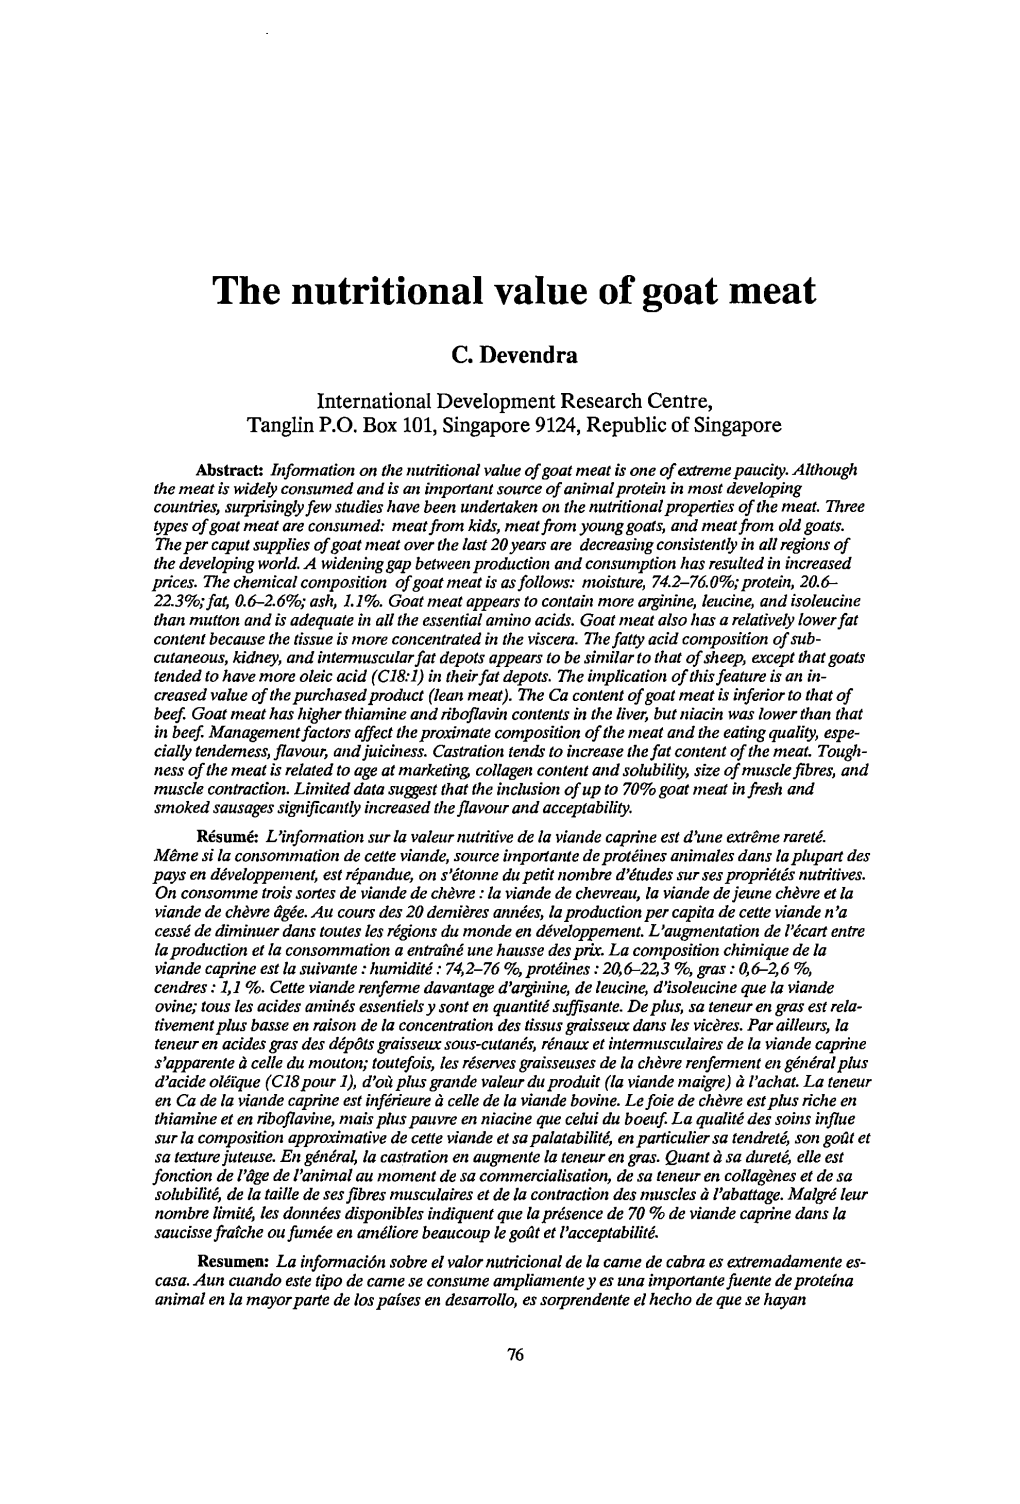 The Nutritional Value of Goat Meat